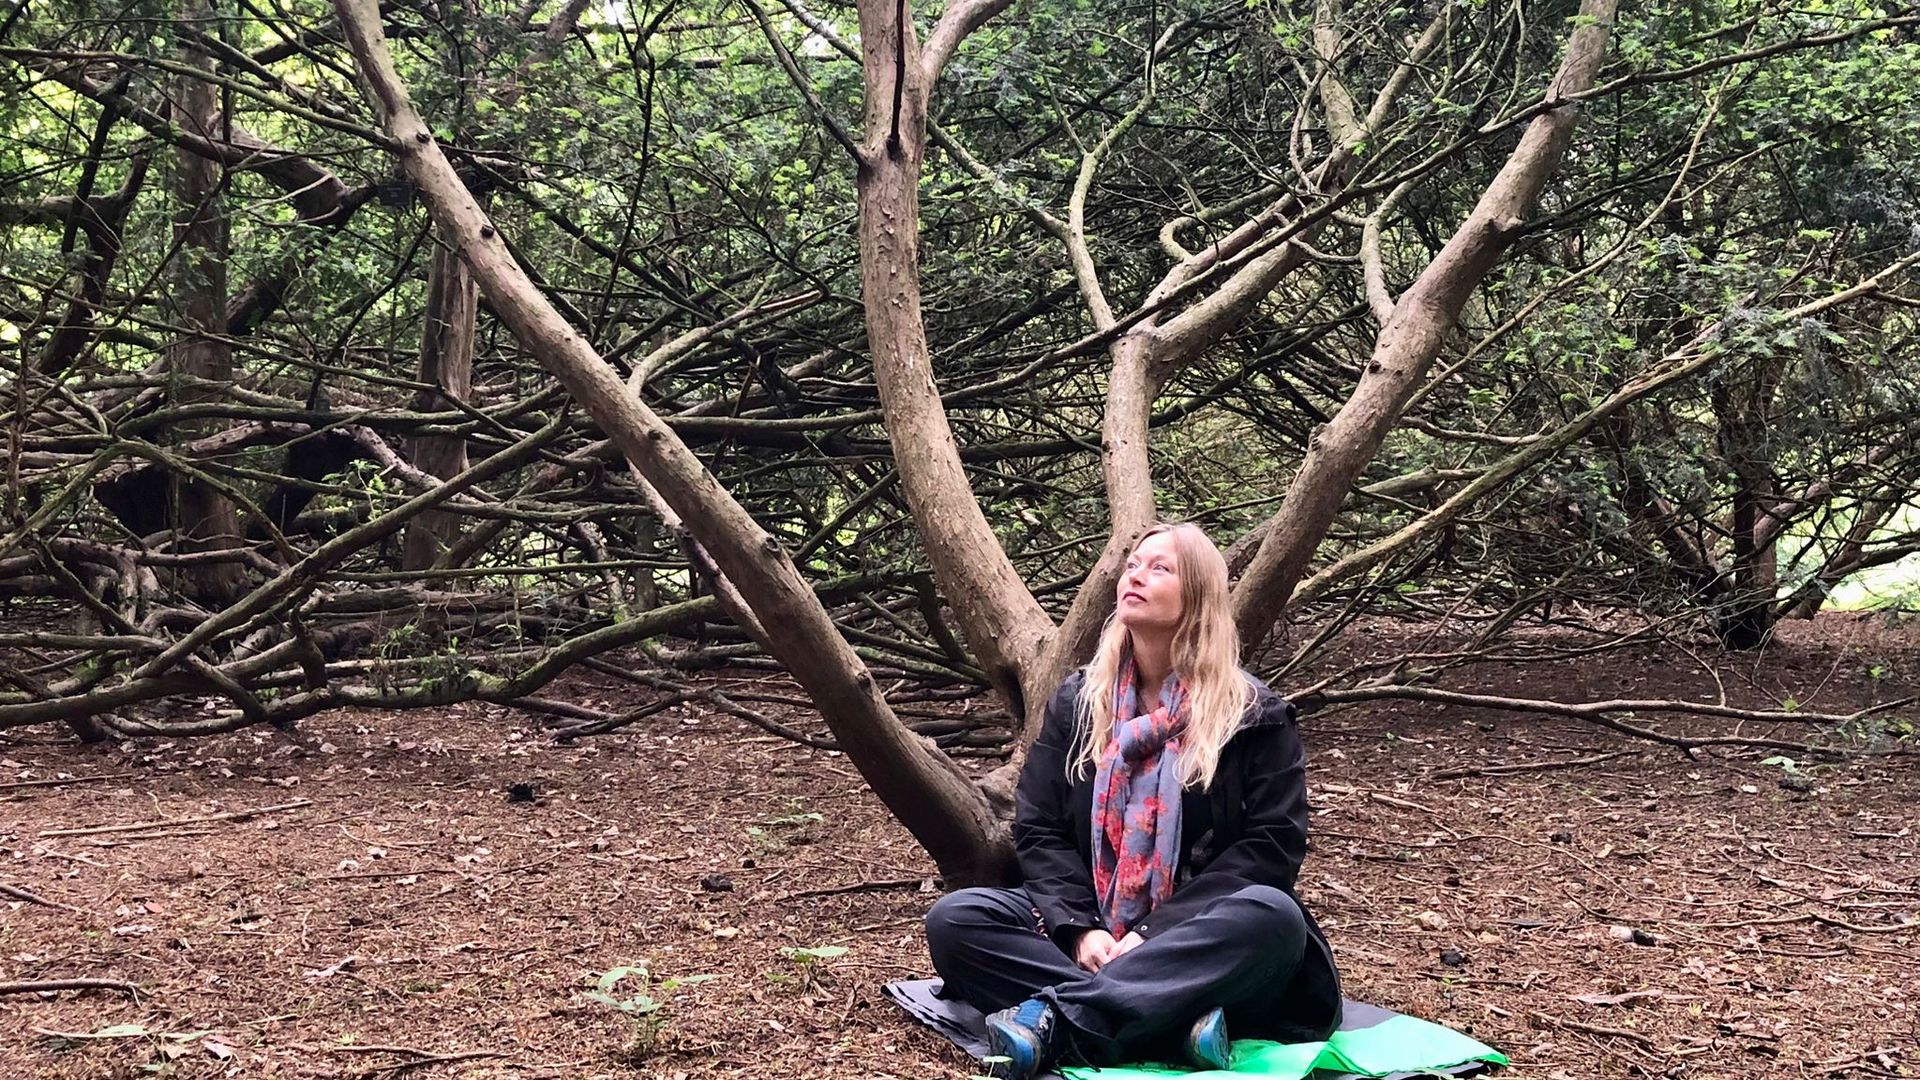 Forest bathers extol benefits of ecotherapy amid mental health crisis